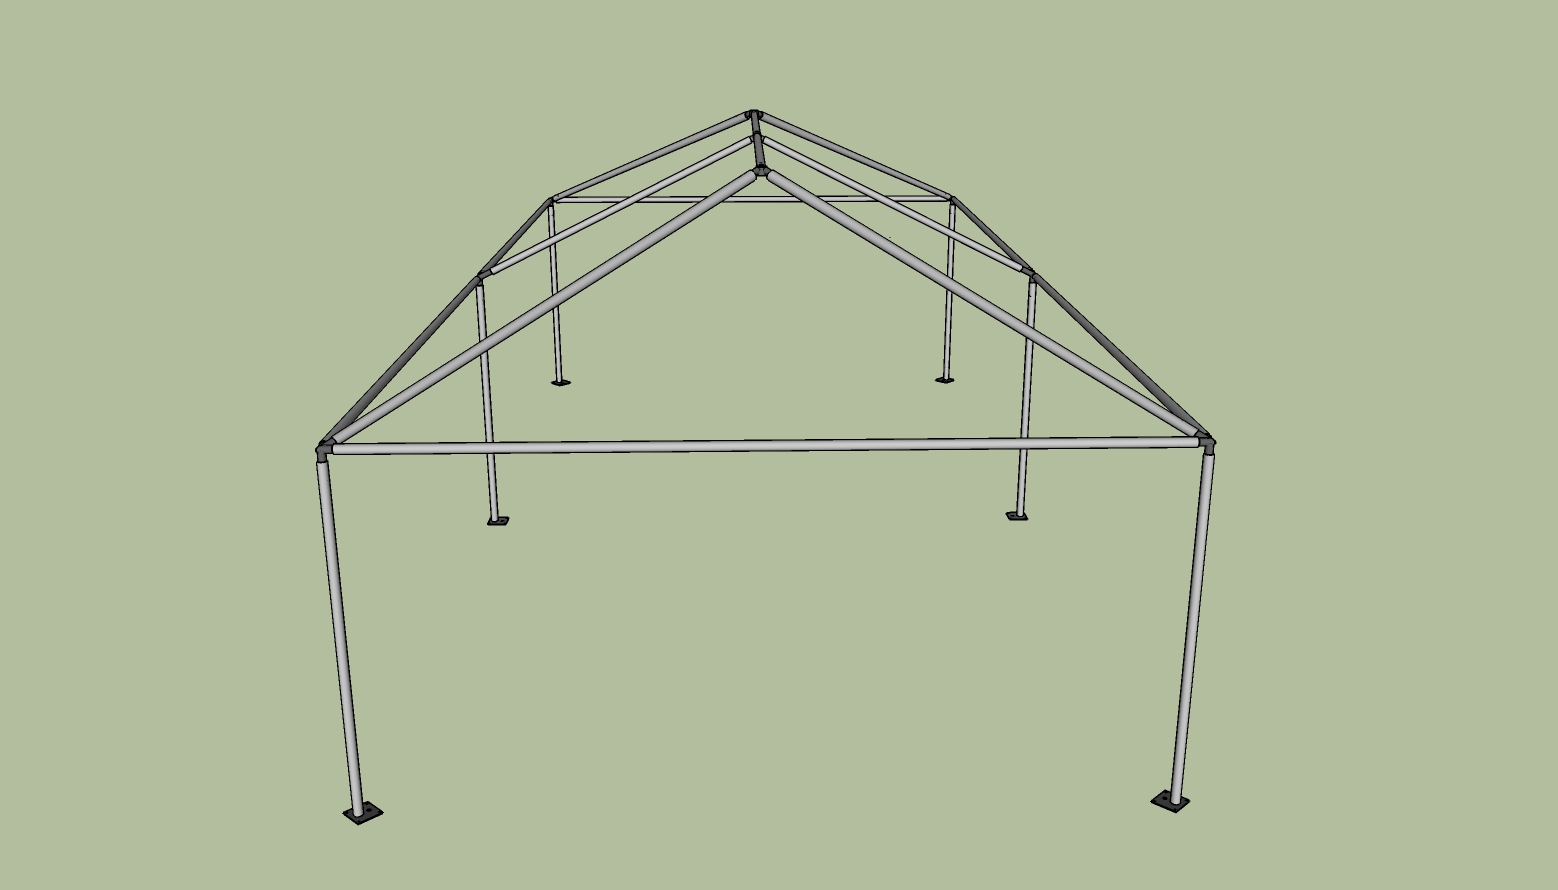 15x30 frame tent side view